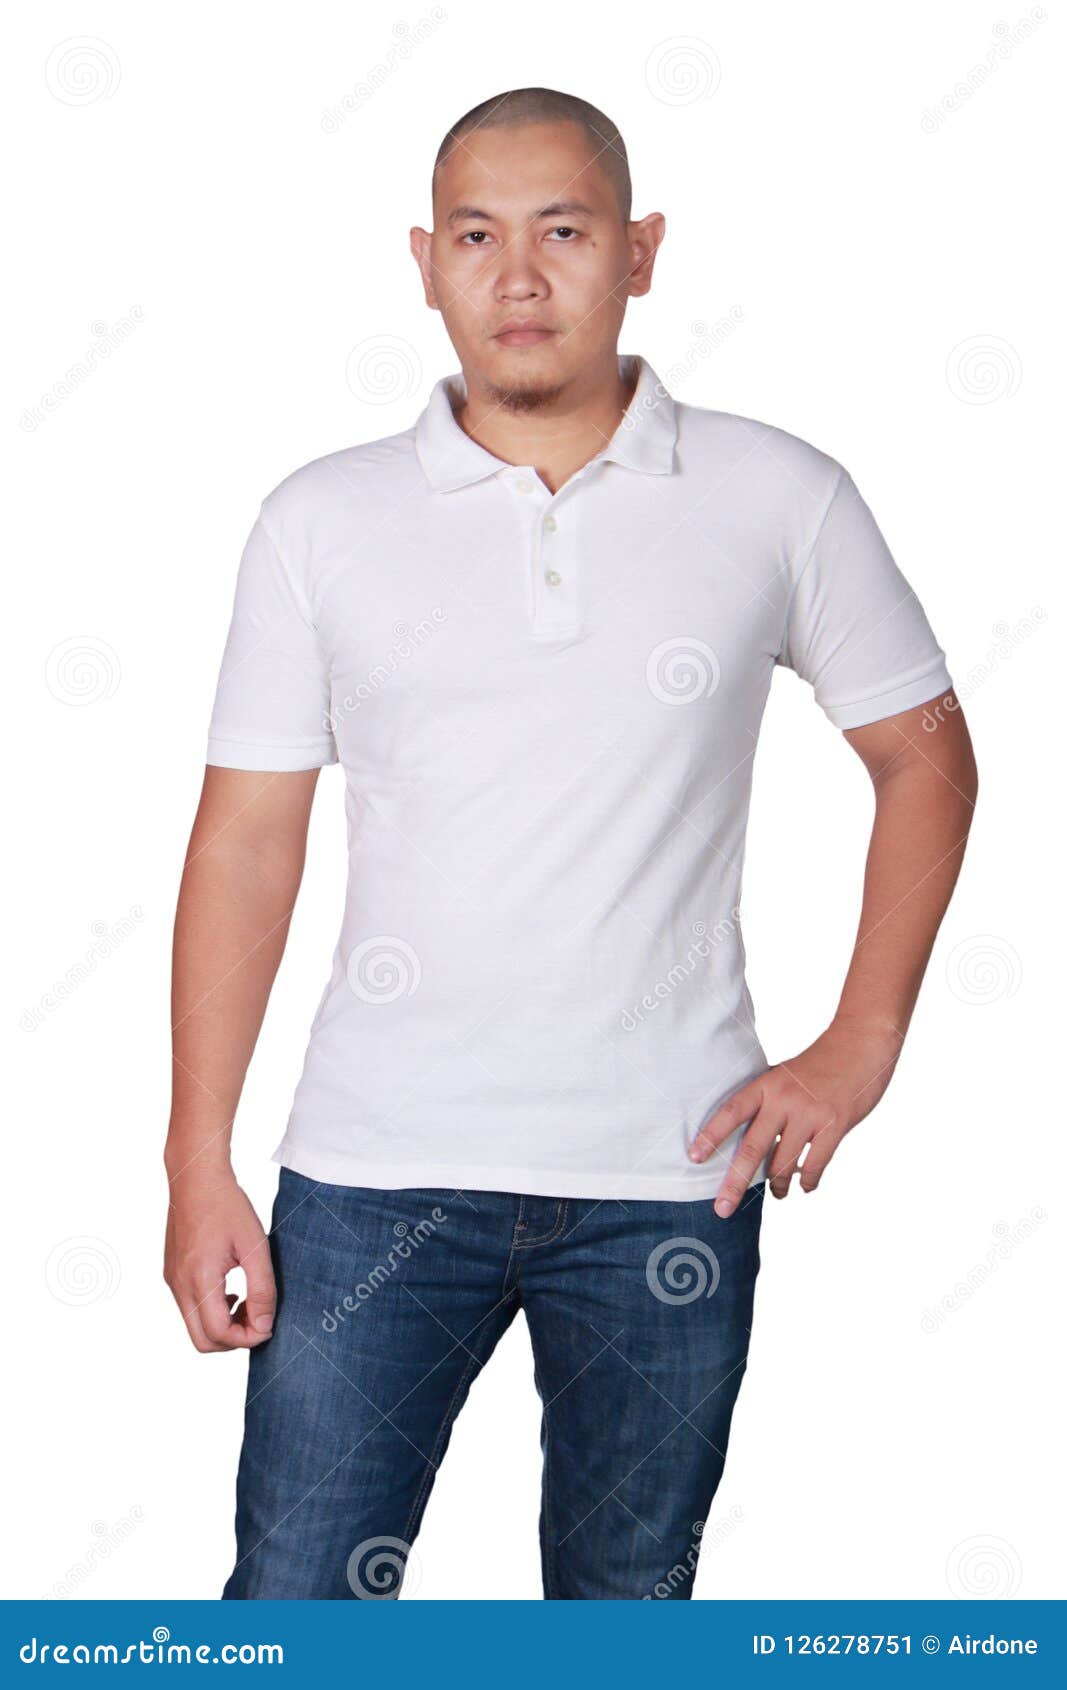 Download Polo Shirt Template Mock Up Stock Image - Image of copy ...